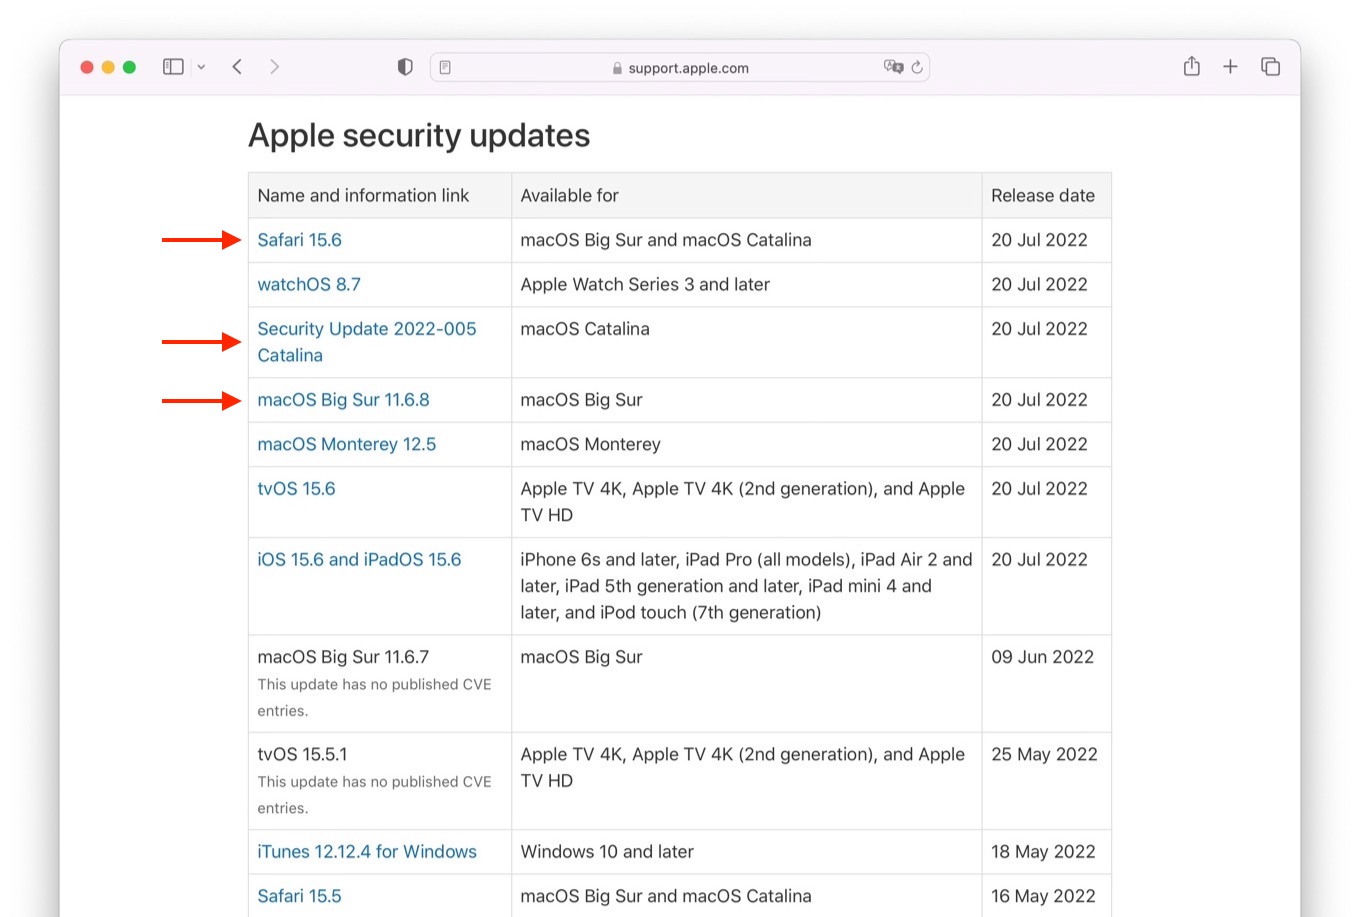 Apple Security Updates 20, July 2022